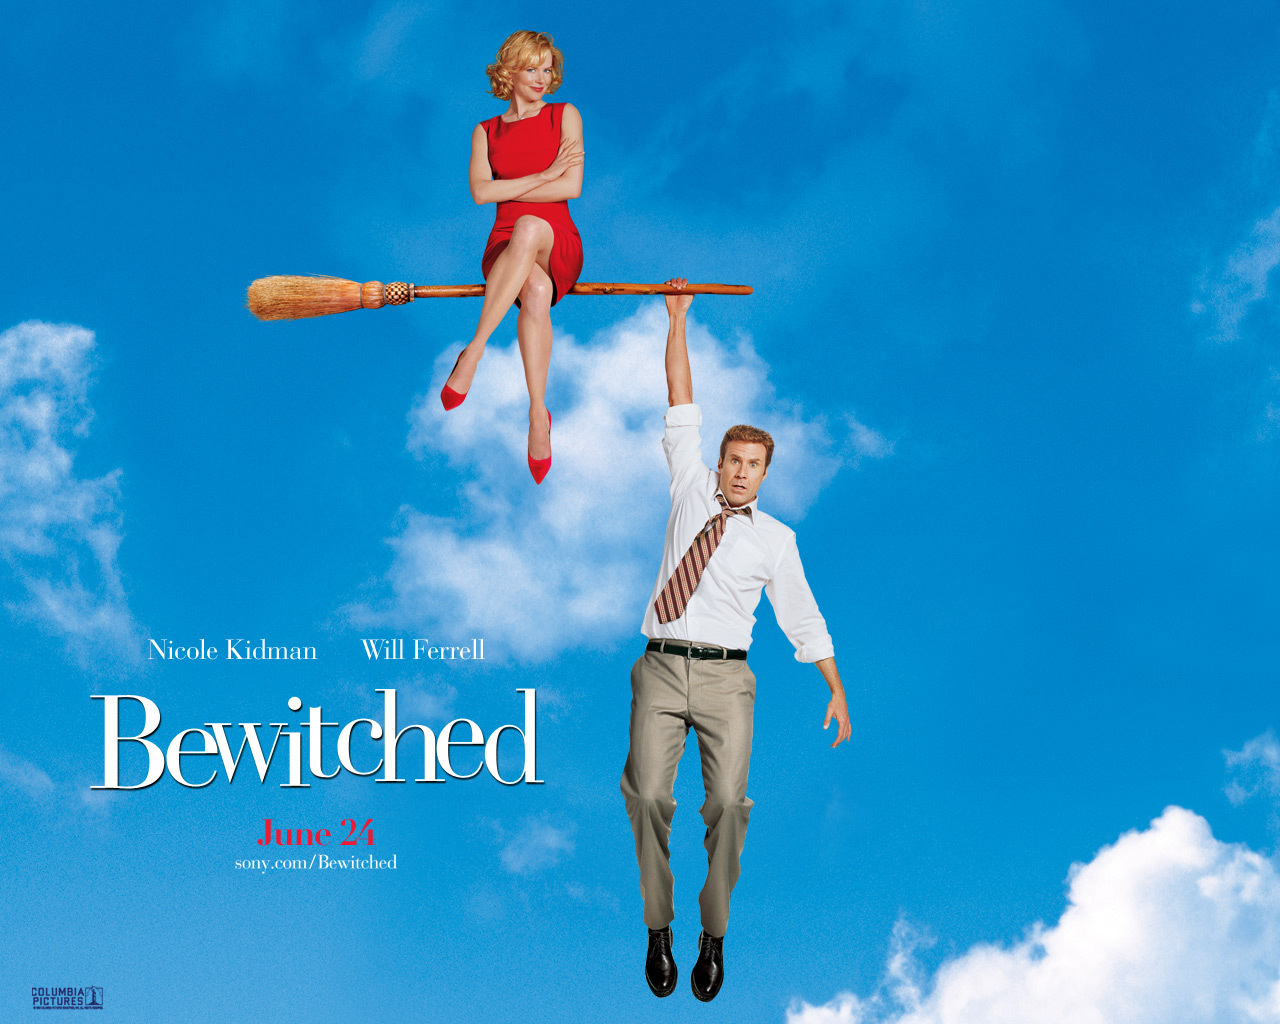 bewitched - The Movie Images on Fanpop.